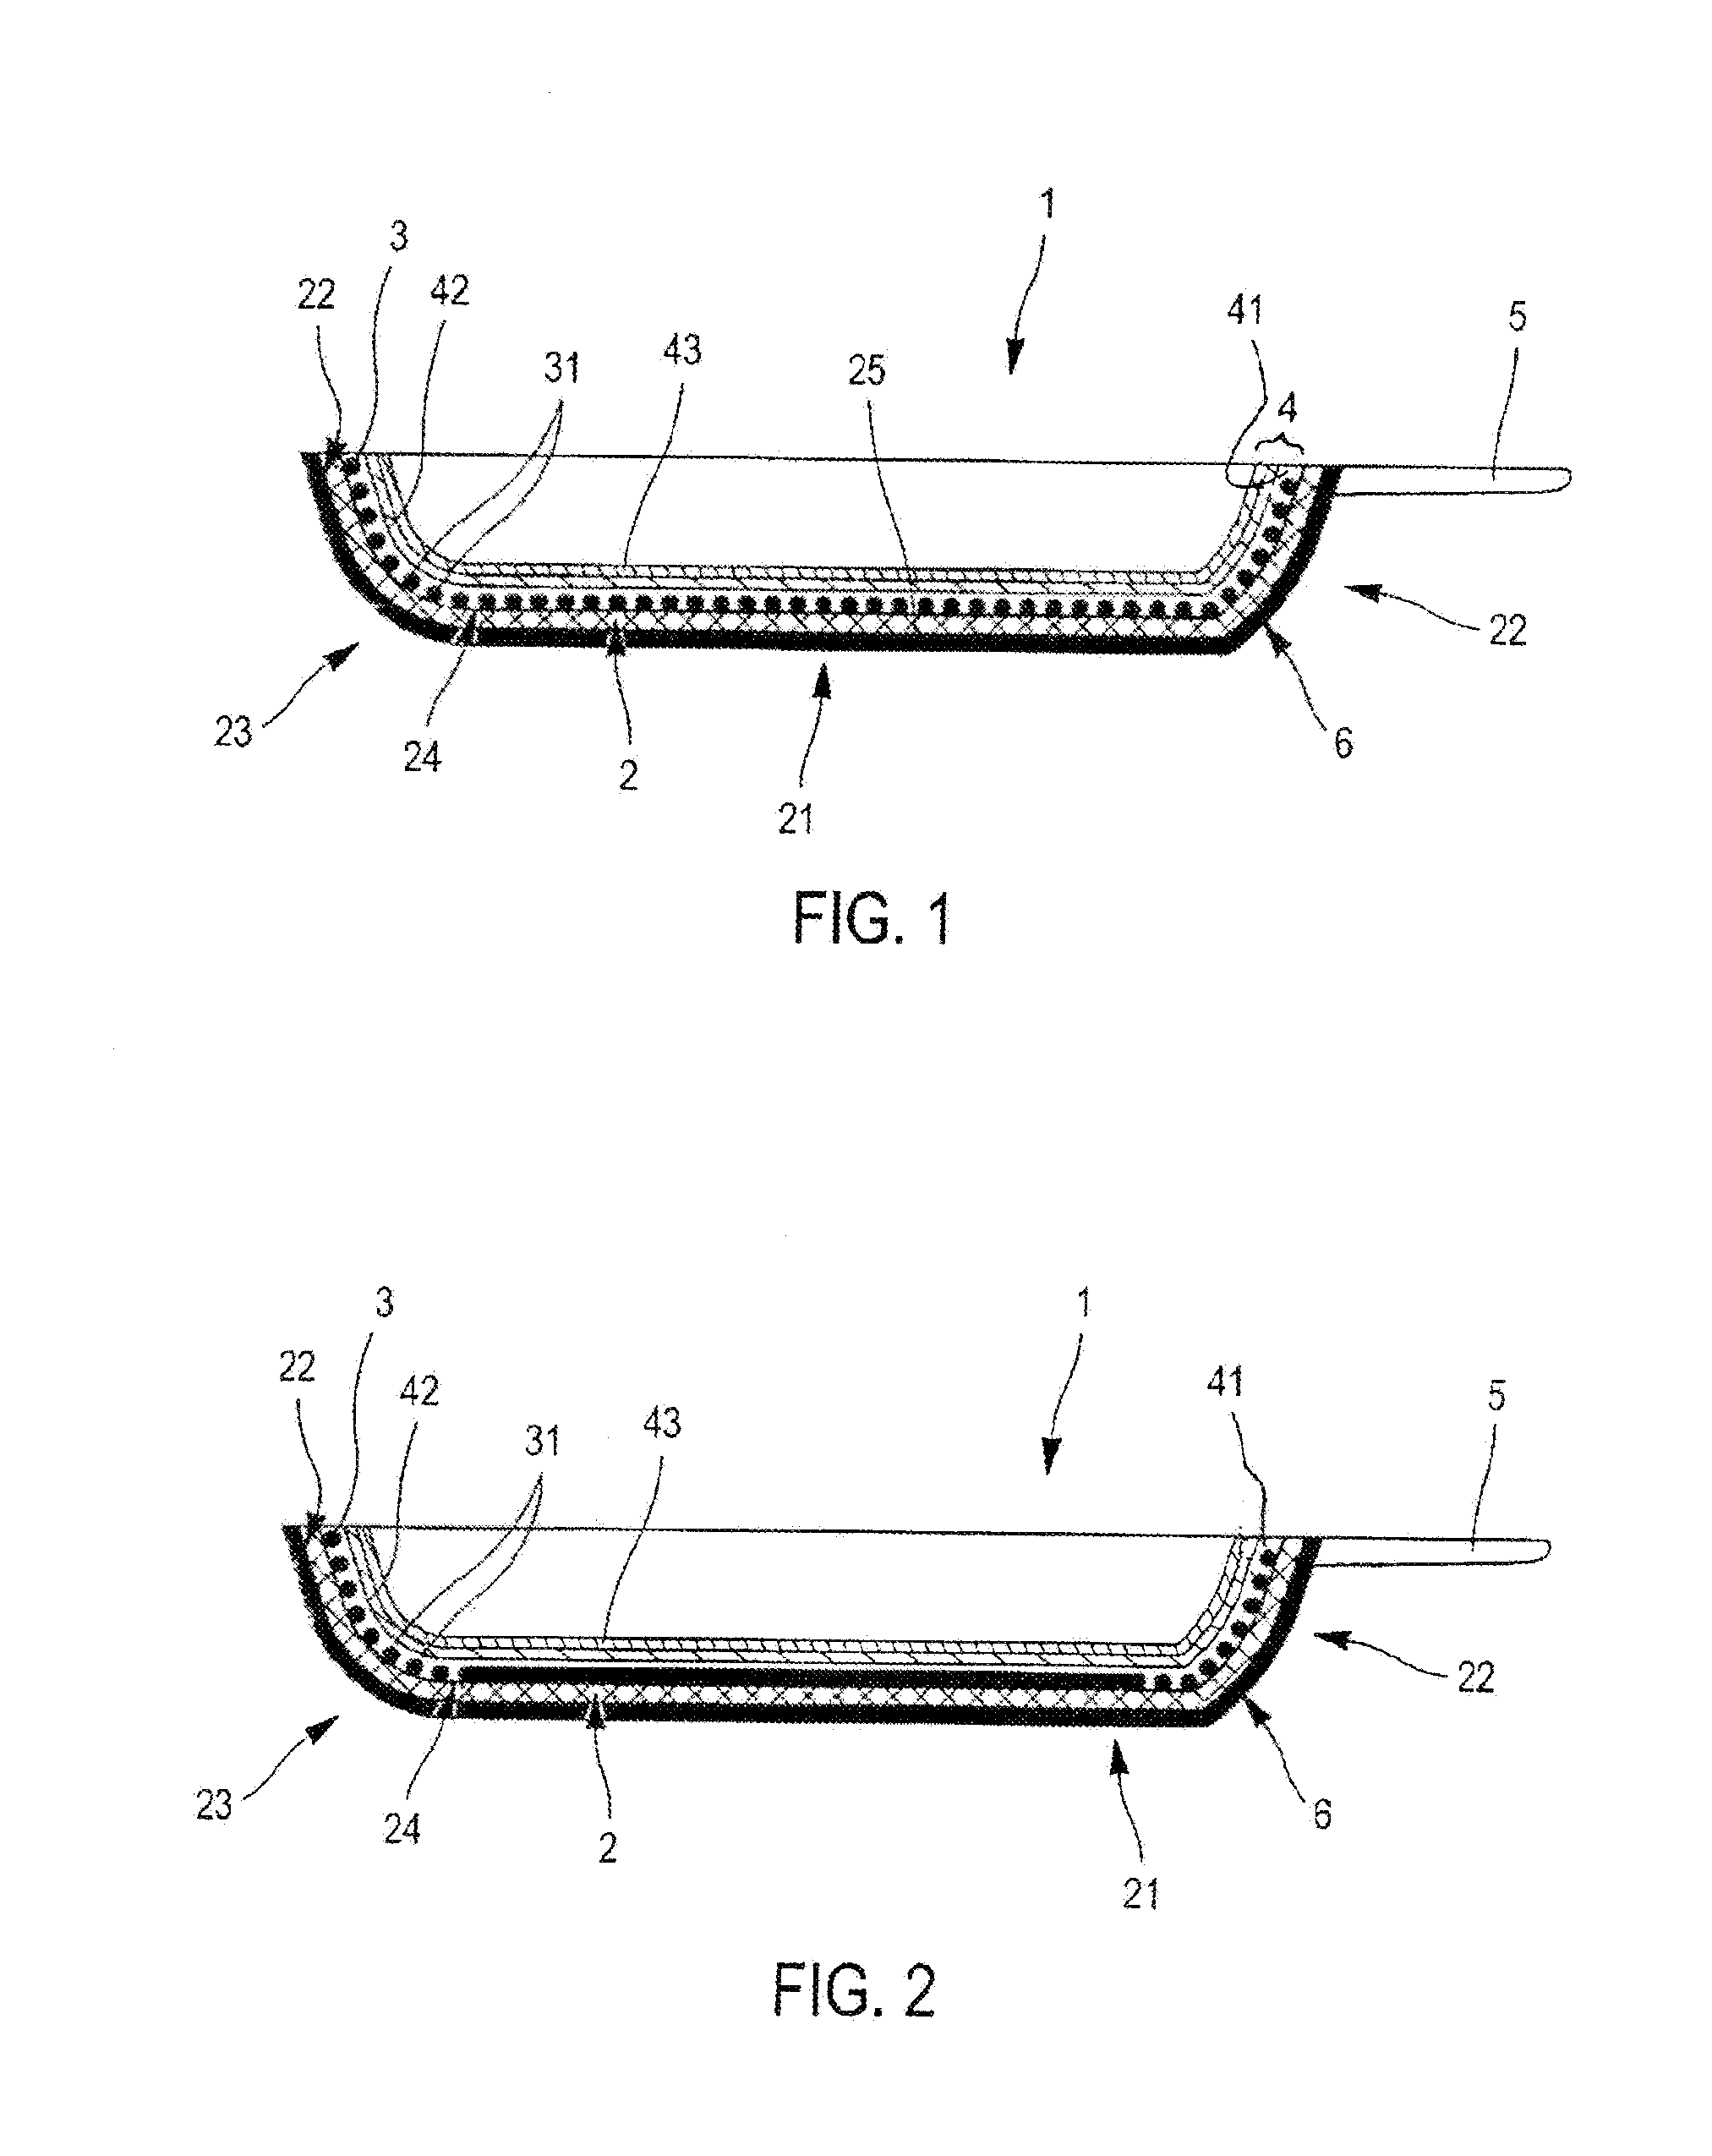 Cooking Utensil Comprising a Hard Base Made from Ceramic and/or Metal and/or Polymer Material and a Nonstick Coating Containing a Fluorocarbon Resin